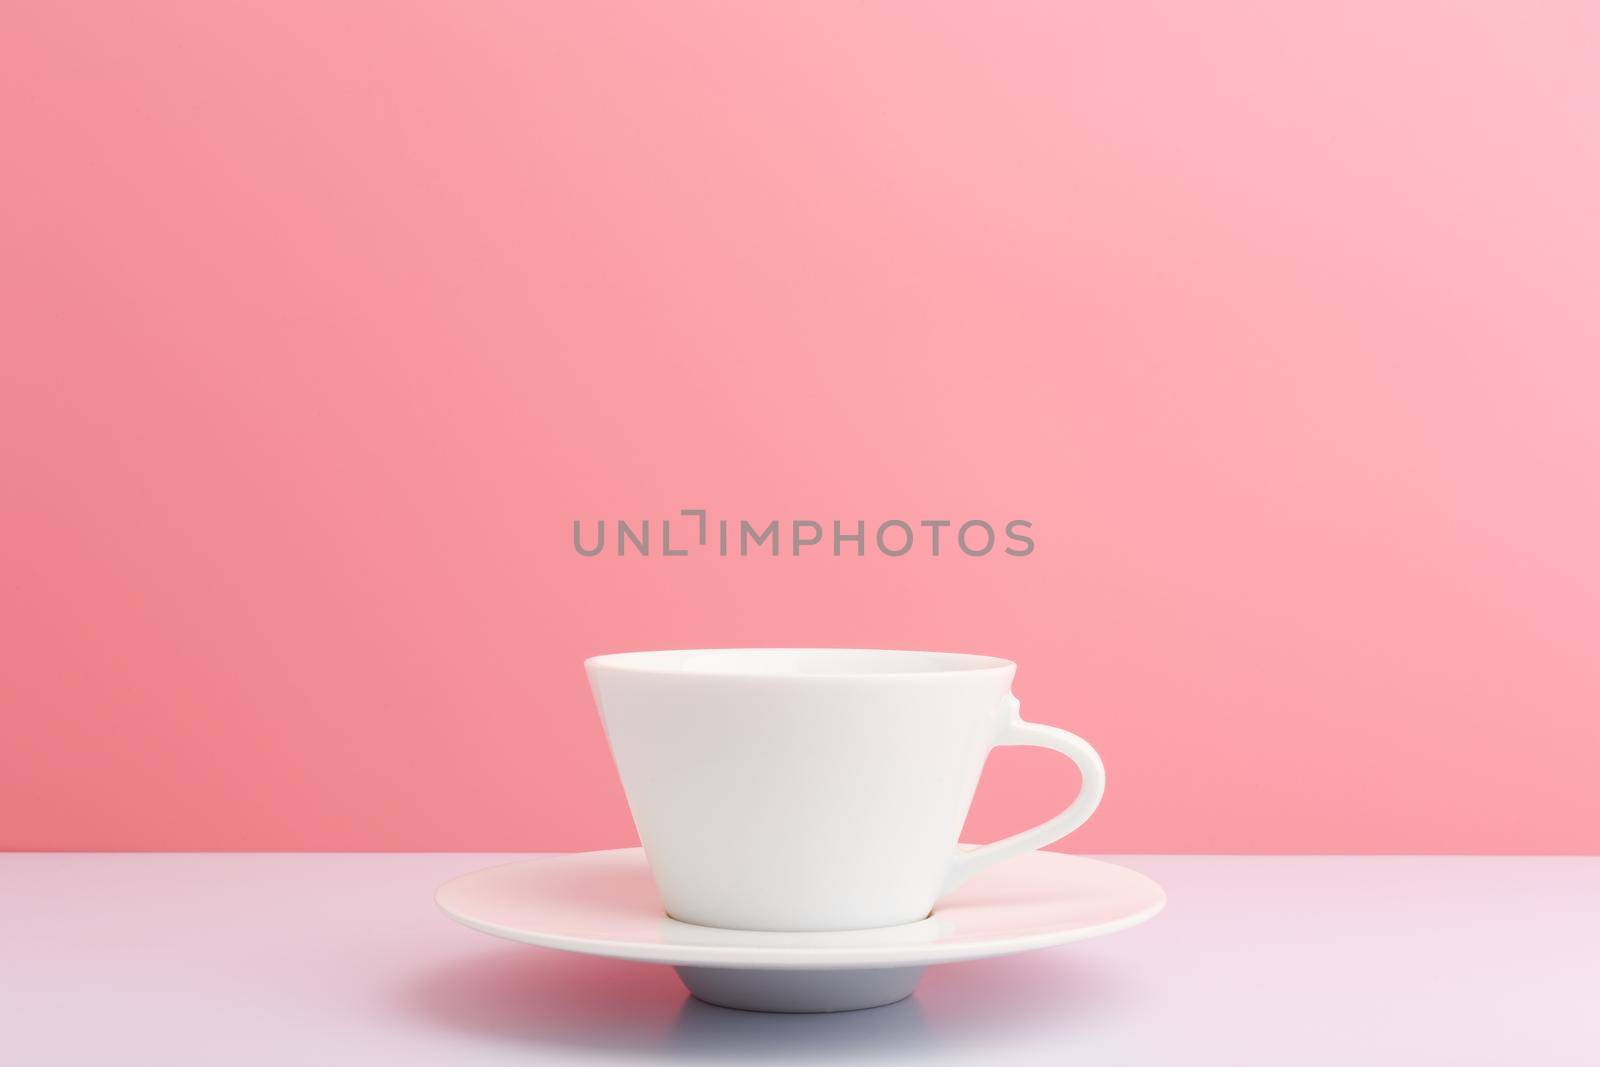 White ceramic coffee cup with saucer on white table against light pink background with copy space. Concept of hot drinks and kitchen utensil